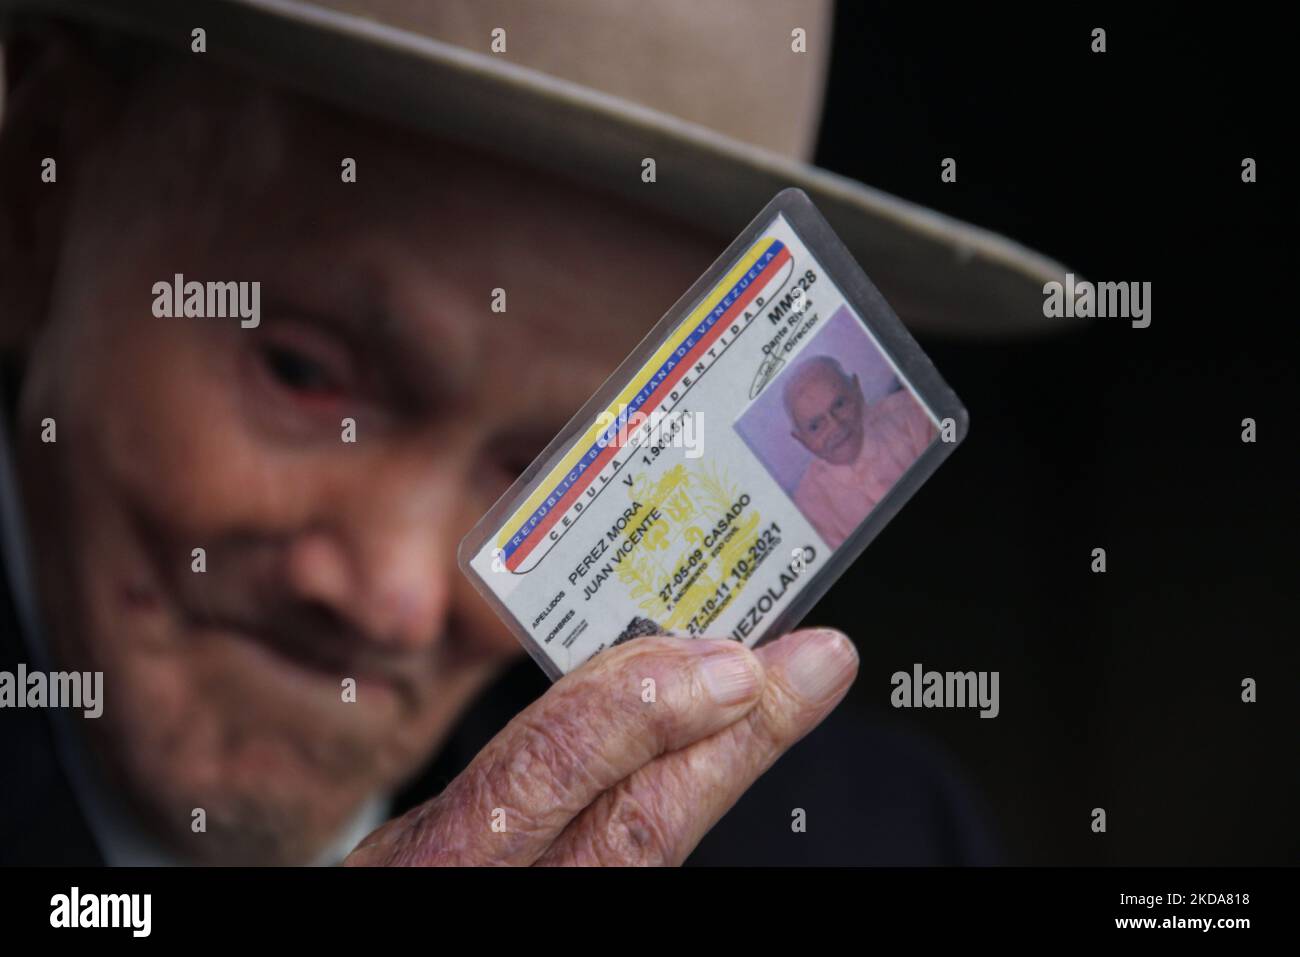 Juan Vicente Mora is seen showing his ID card during an interview. San Jose de Bolivar, January 24, 2022. The oldest man in the world is the Venezuelan elder Juan Vicente Mora, with an age of 112 years and 253 days, officially recognized by the Guinness Book of World Records, who informed that he is officially the 'oldest' male person in the world. He was born on May 27, 1909 in El Cobre, Táchira State, Venezuela. Juan Vicente has 28 grandchildren, 41 great-grandchildren and 112 great-great-grandchildren, the Guinness Book said on Twitter. (Photo by Jorge Mantilla/NurPhoto) Stock Photo